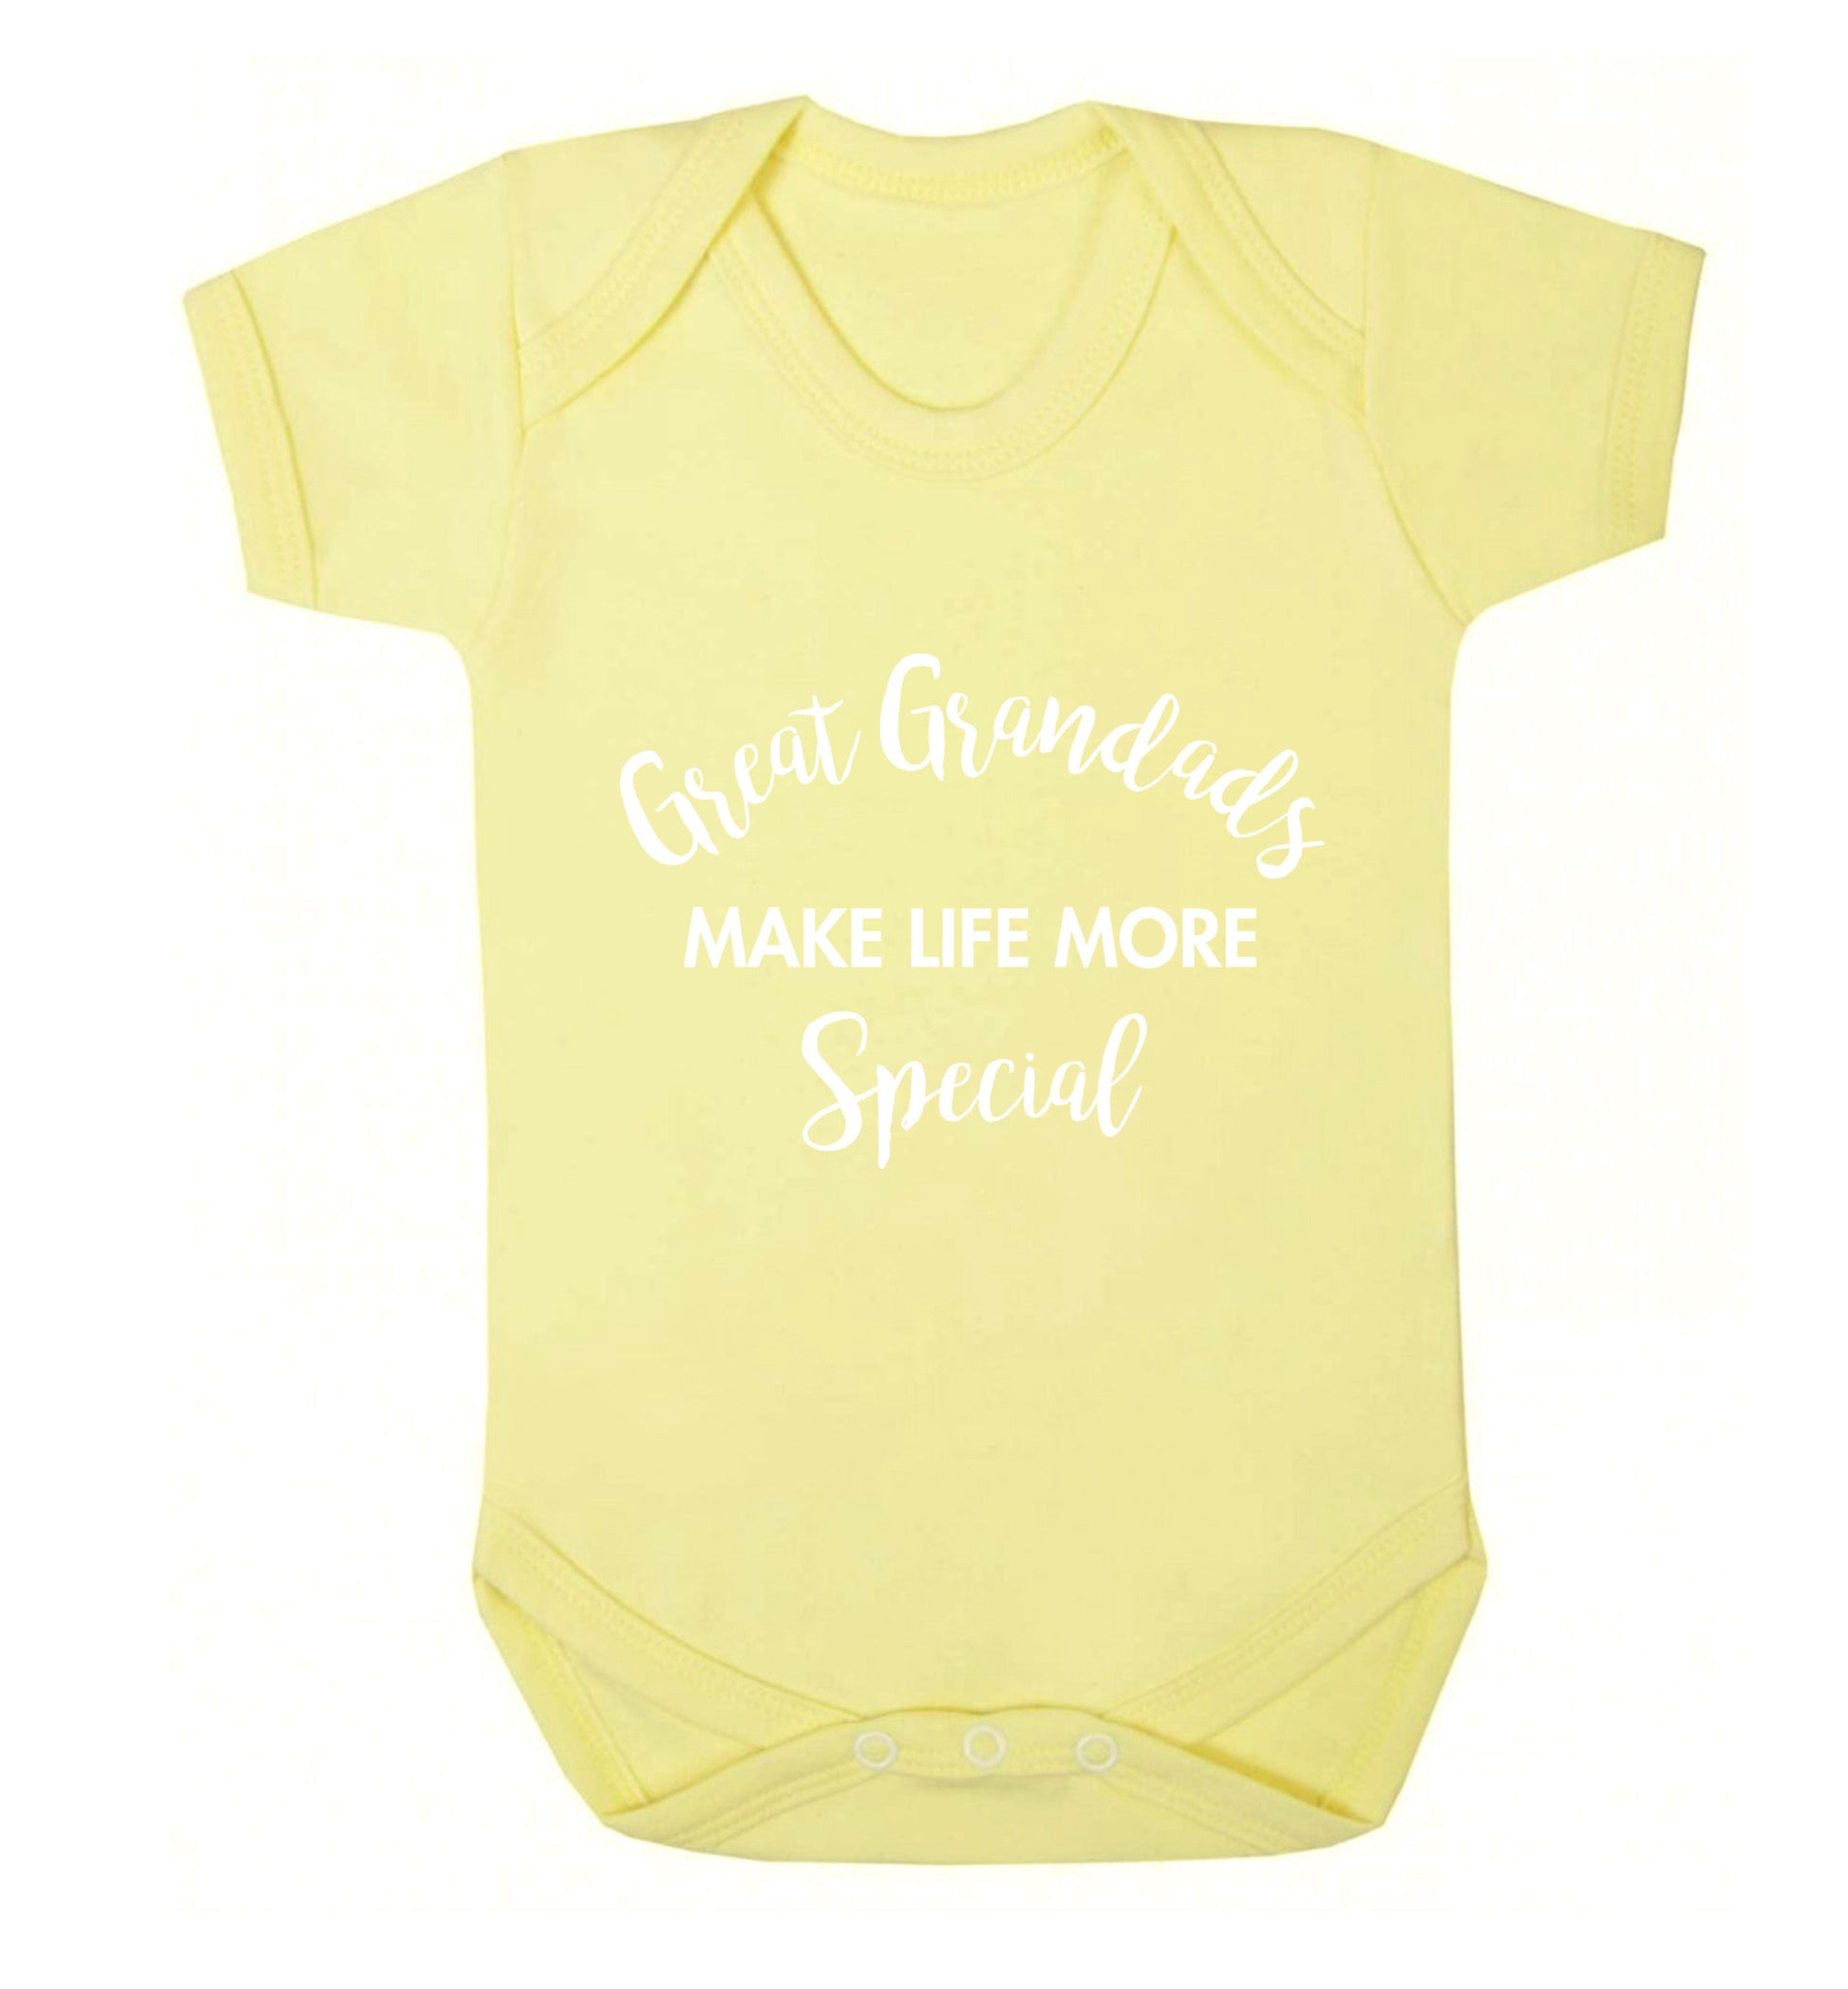 Great Grandads make life more special Baby Vest pale yellow 18-24 months